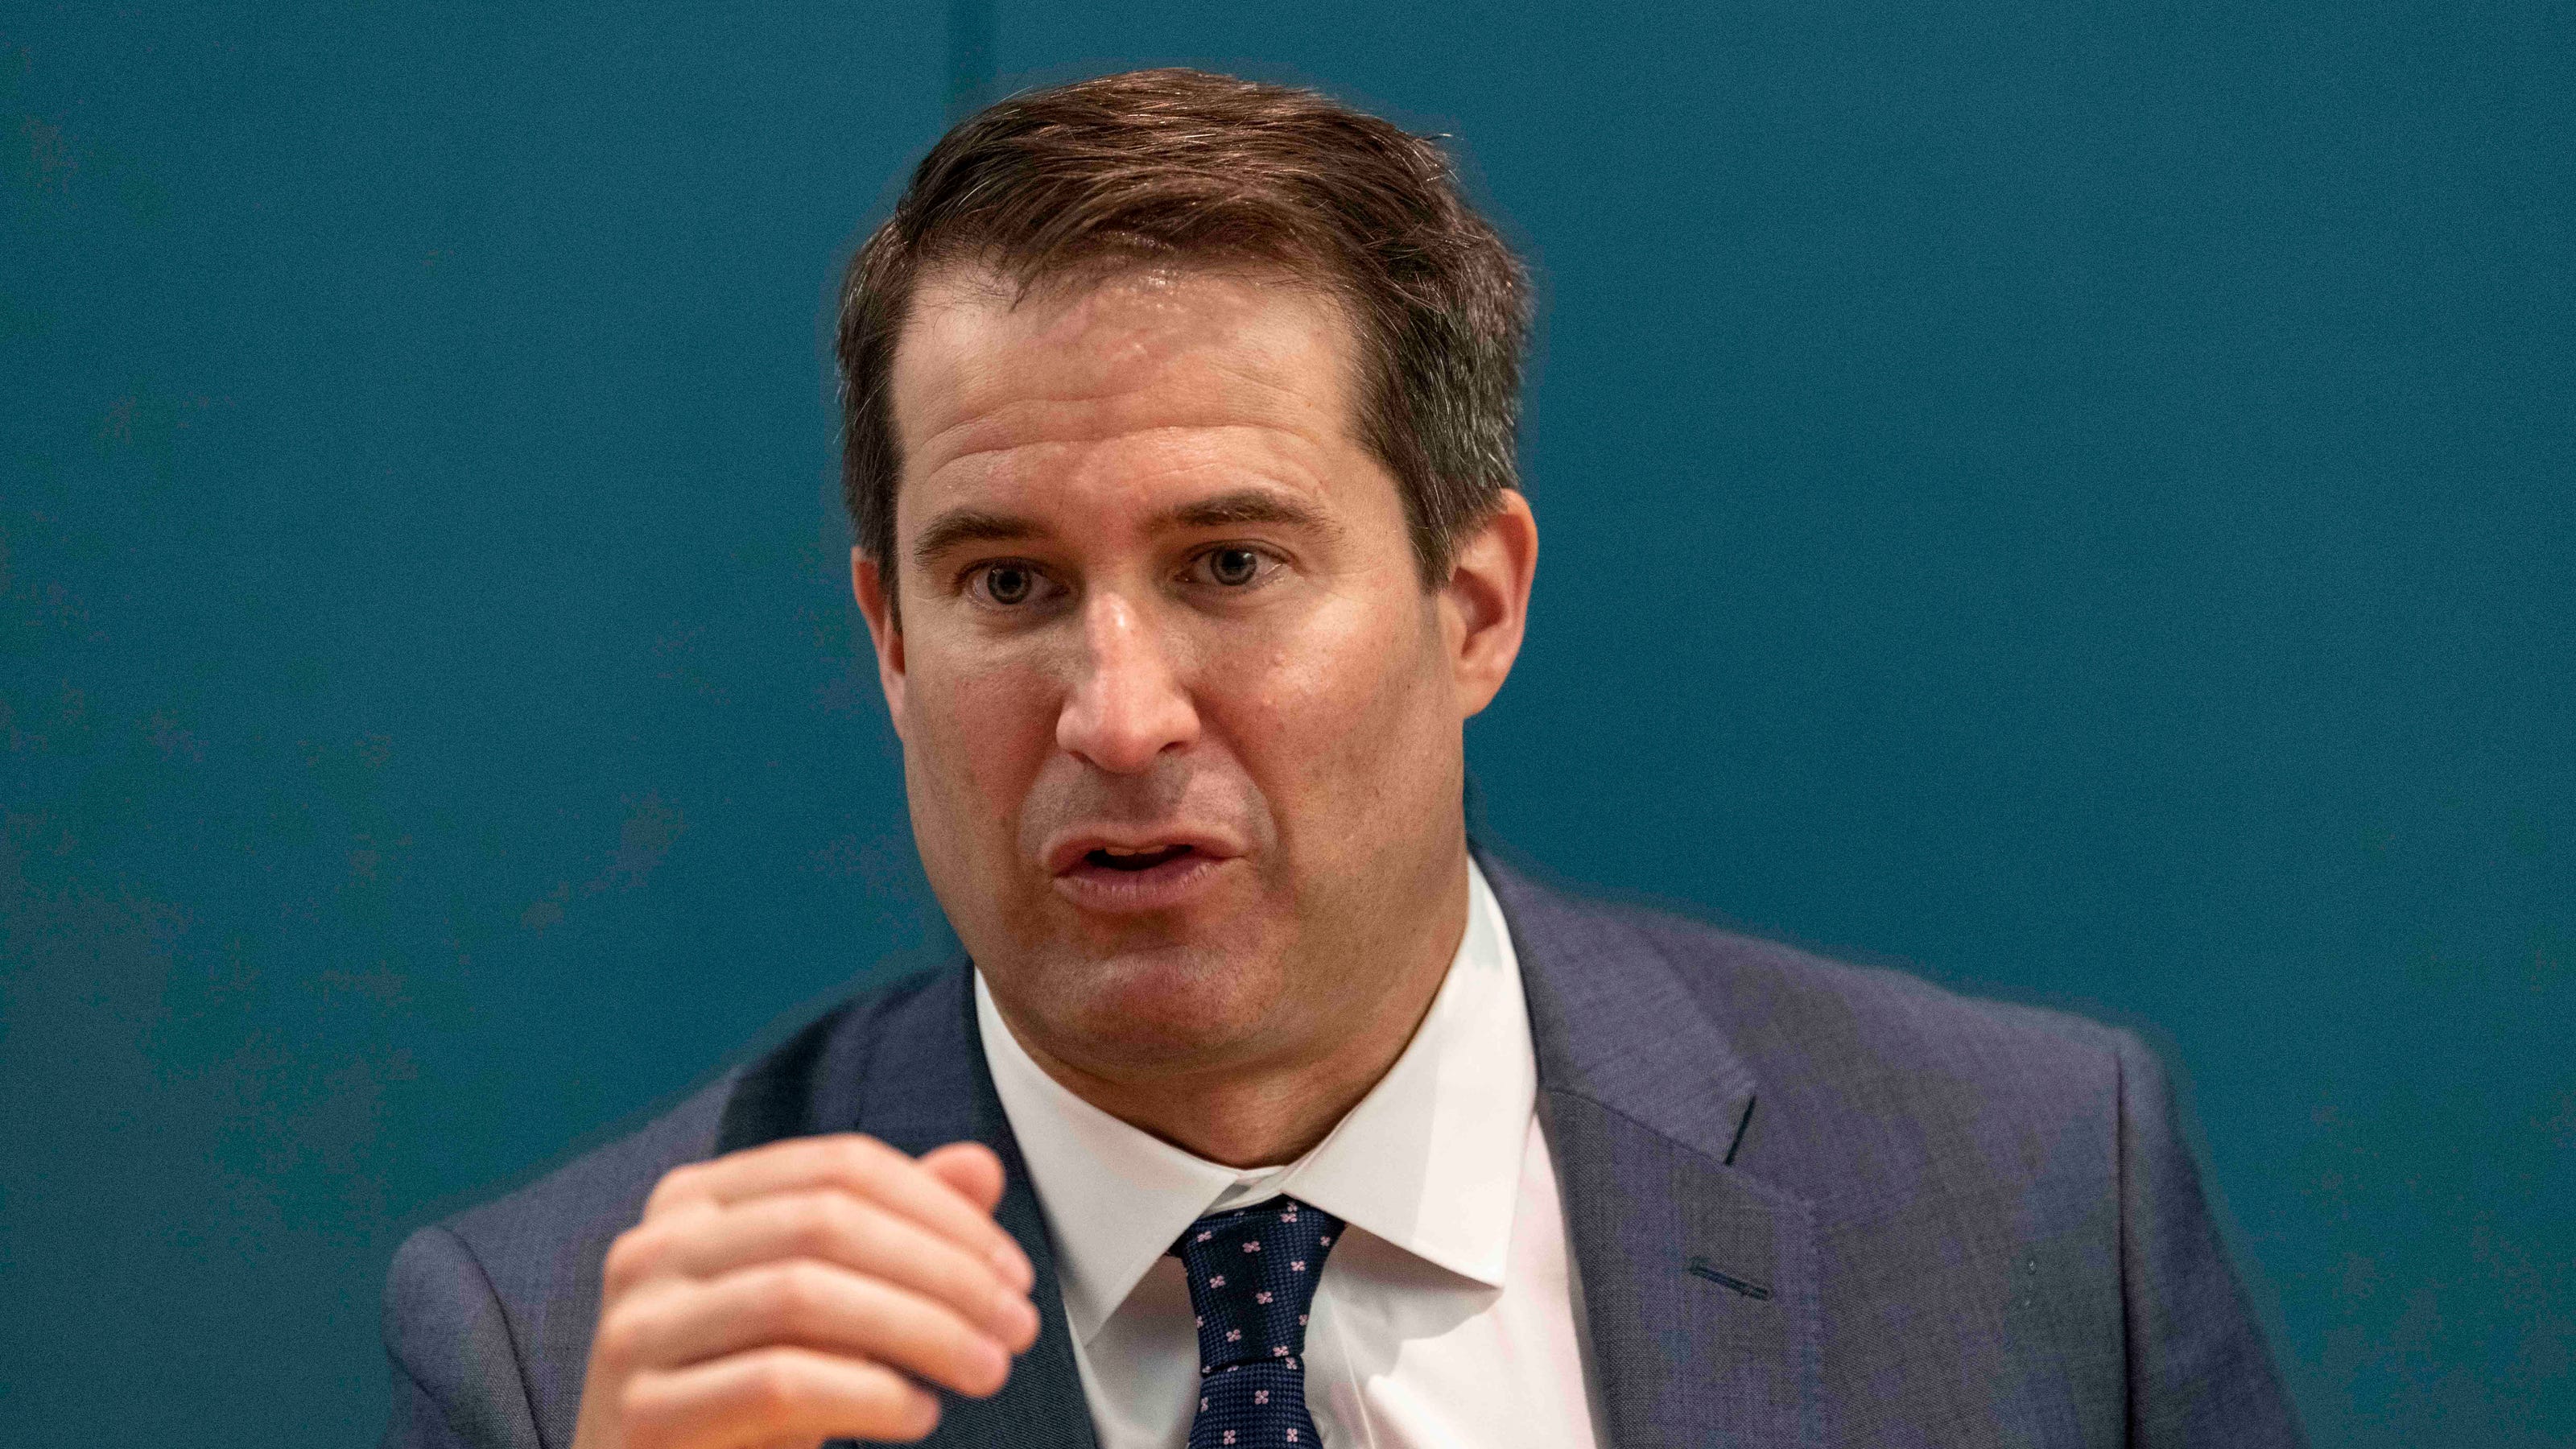 Seth Moulton Drops Out Of 2020 Presidential Race